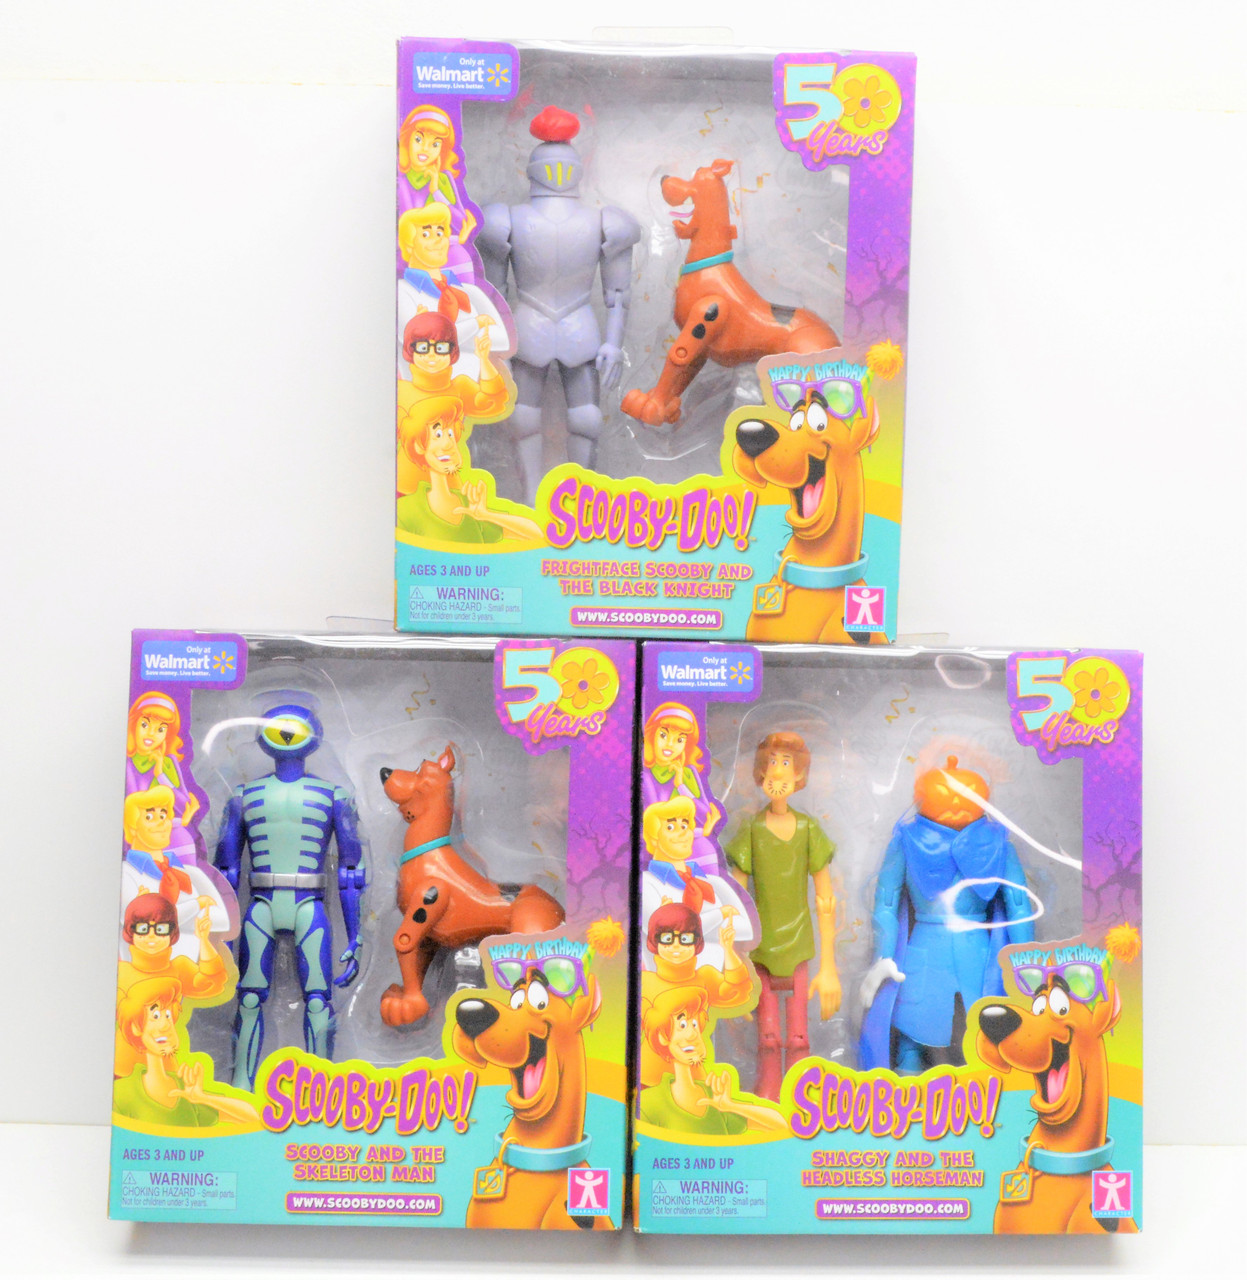 Character Ltd.Scooby-Doo 50th anniversary action figure set